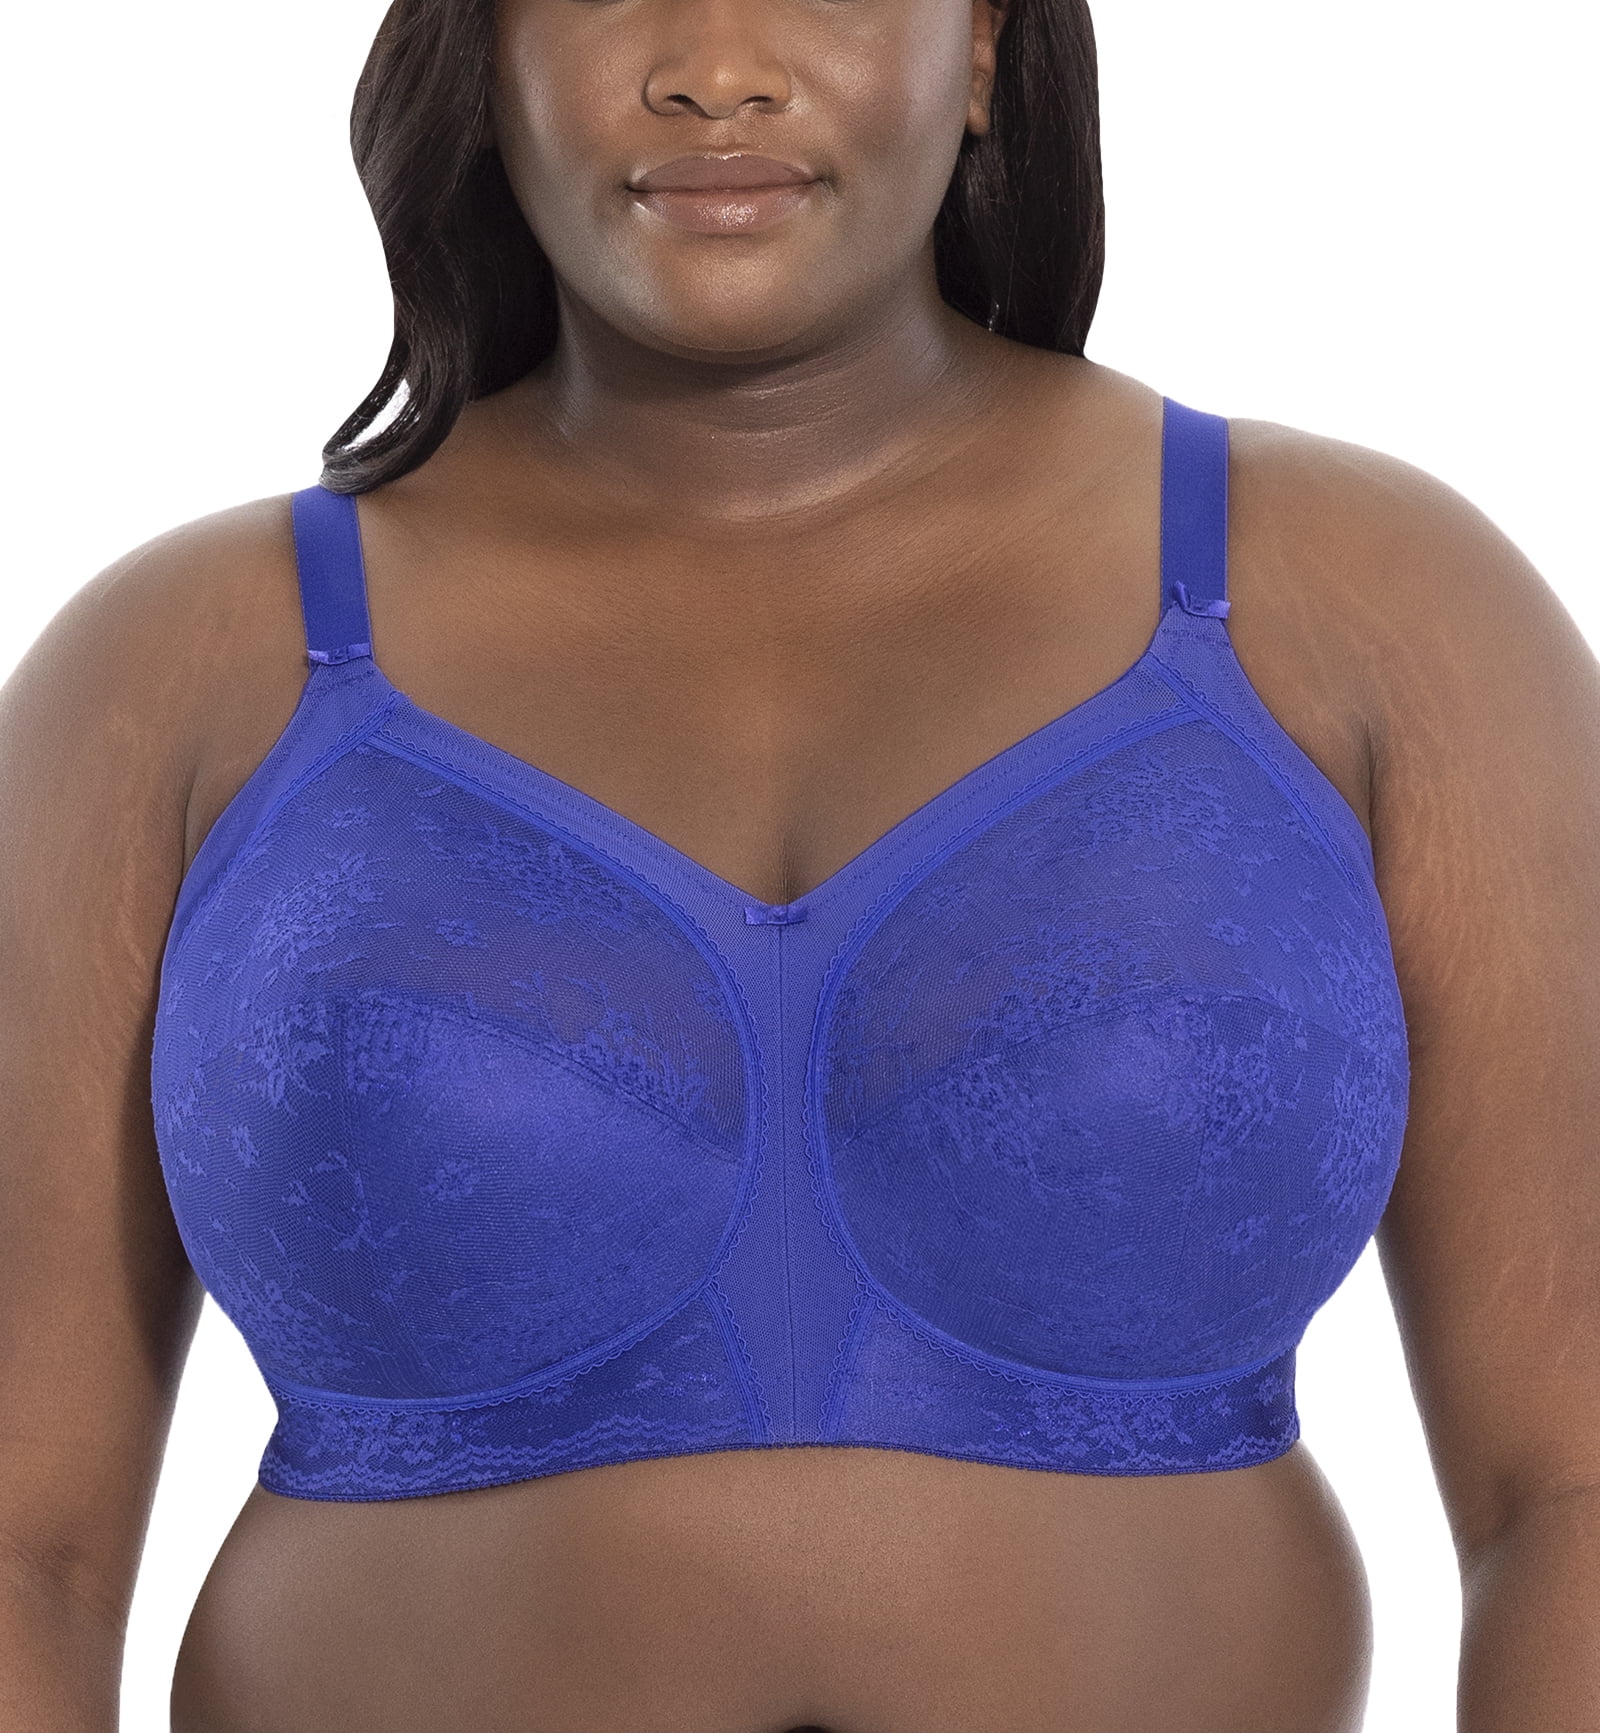 maashie M4408 Cotton Non-Padded Non-Wired Everyday Bra, Olive 38D, Pack of  2 Women Full Coverage Non Padded Bra - Buy maashie M4408 Cotton Non-Padded  Non-Wired Everyday Bra, Olive 38D